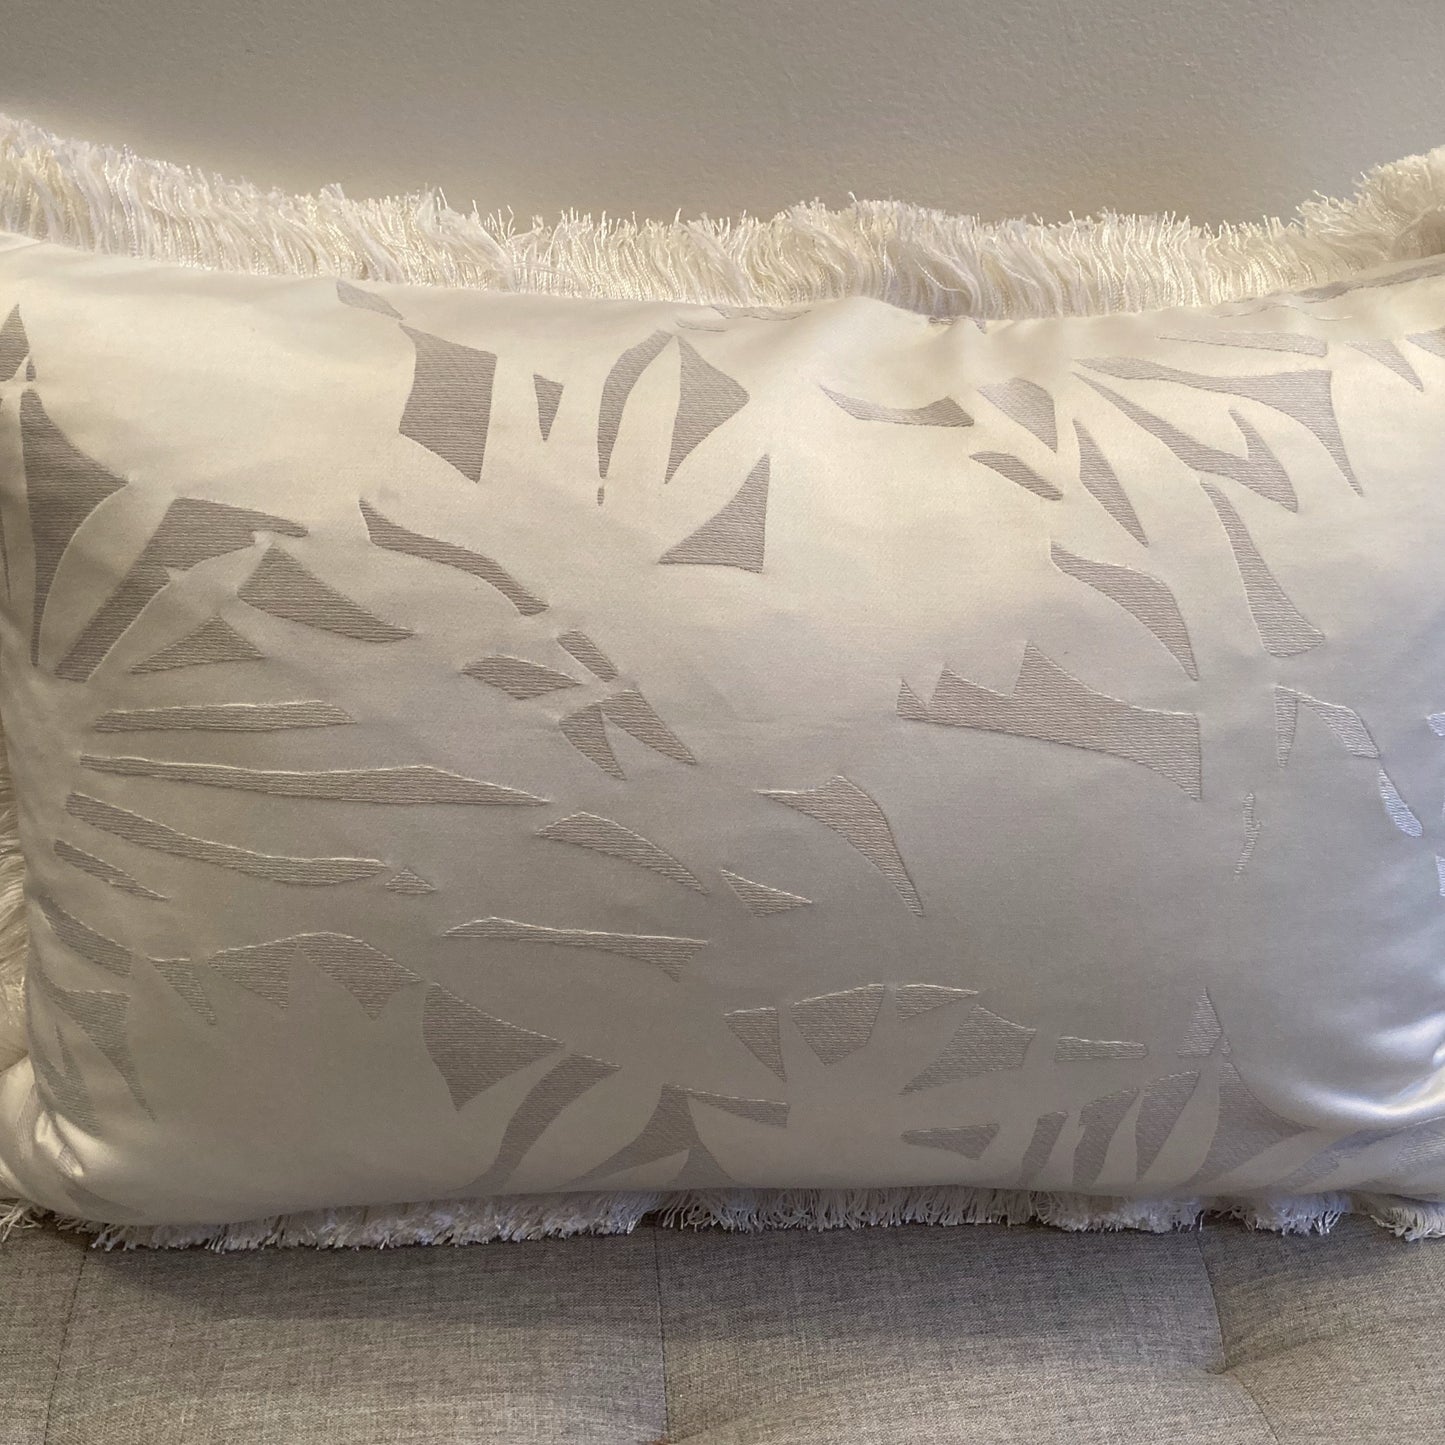 Nights In White Satin Front Glam Toss Pillow 15 X 23 Rectangle Pillow with Down Feather Insert